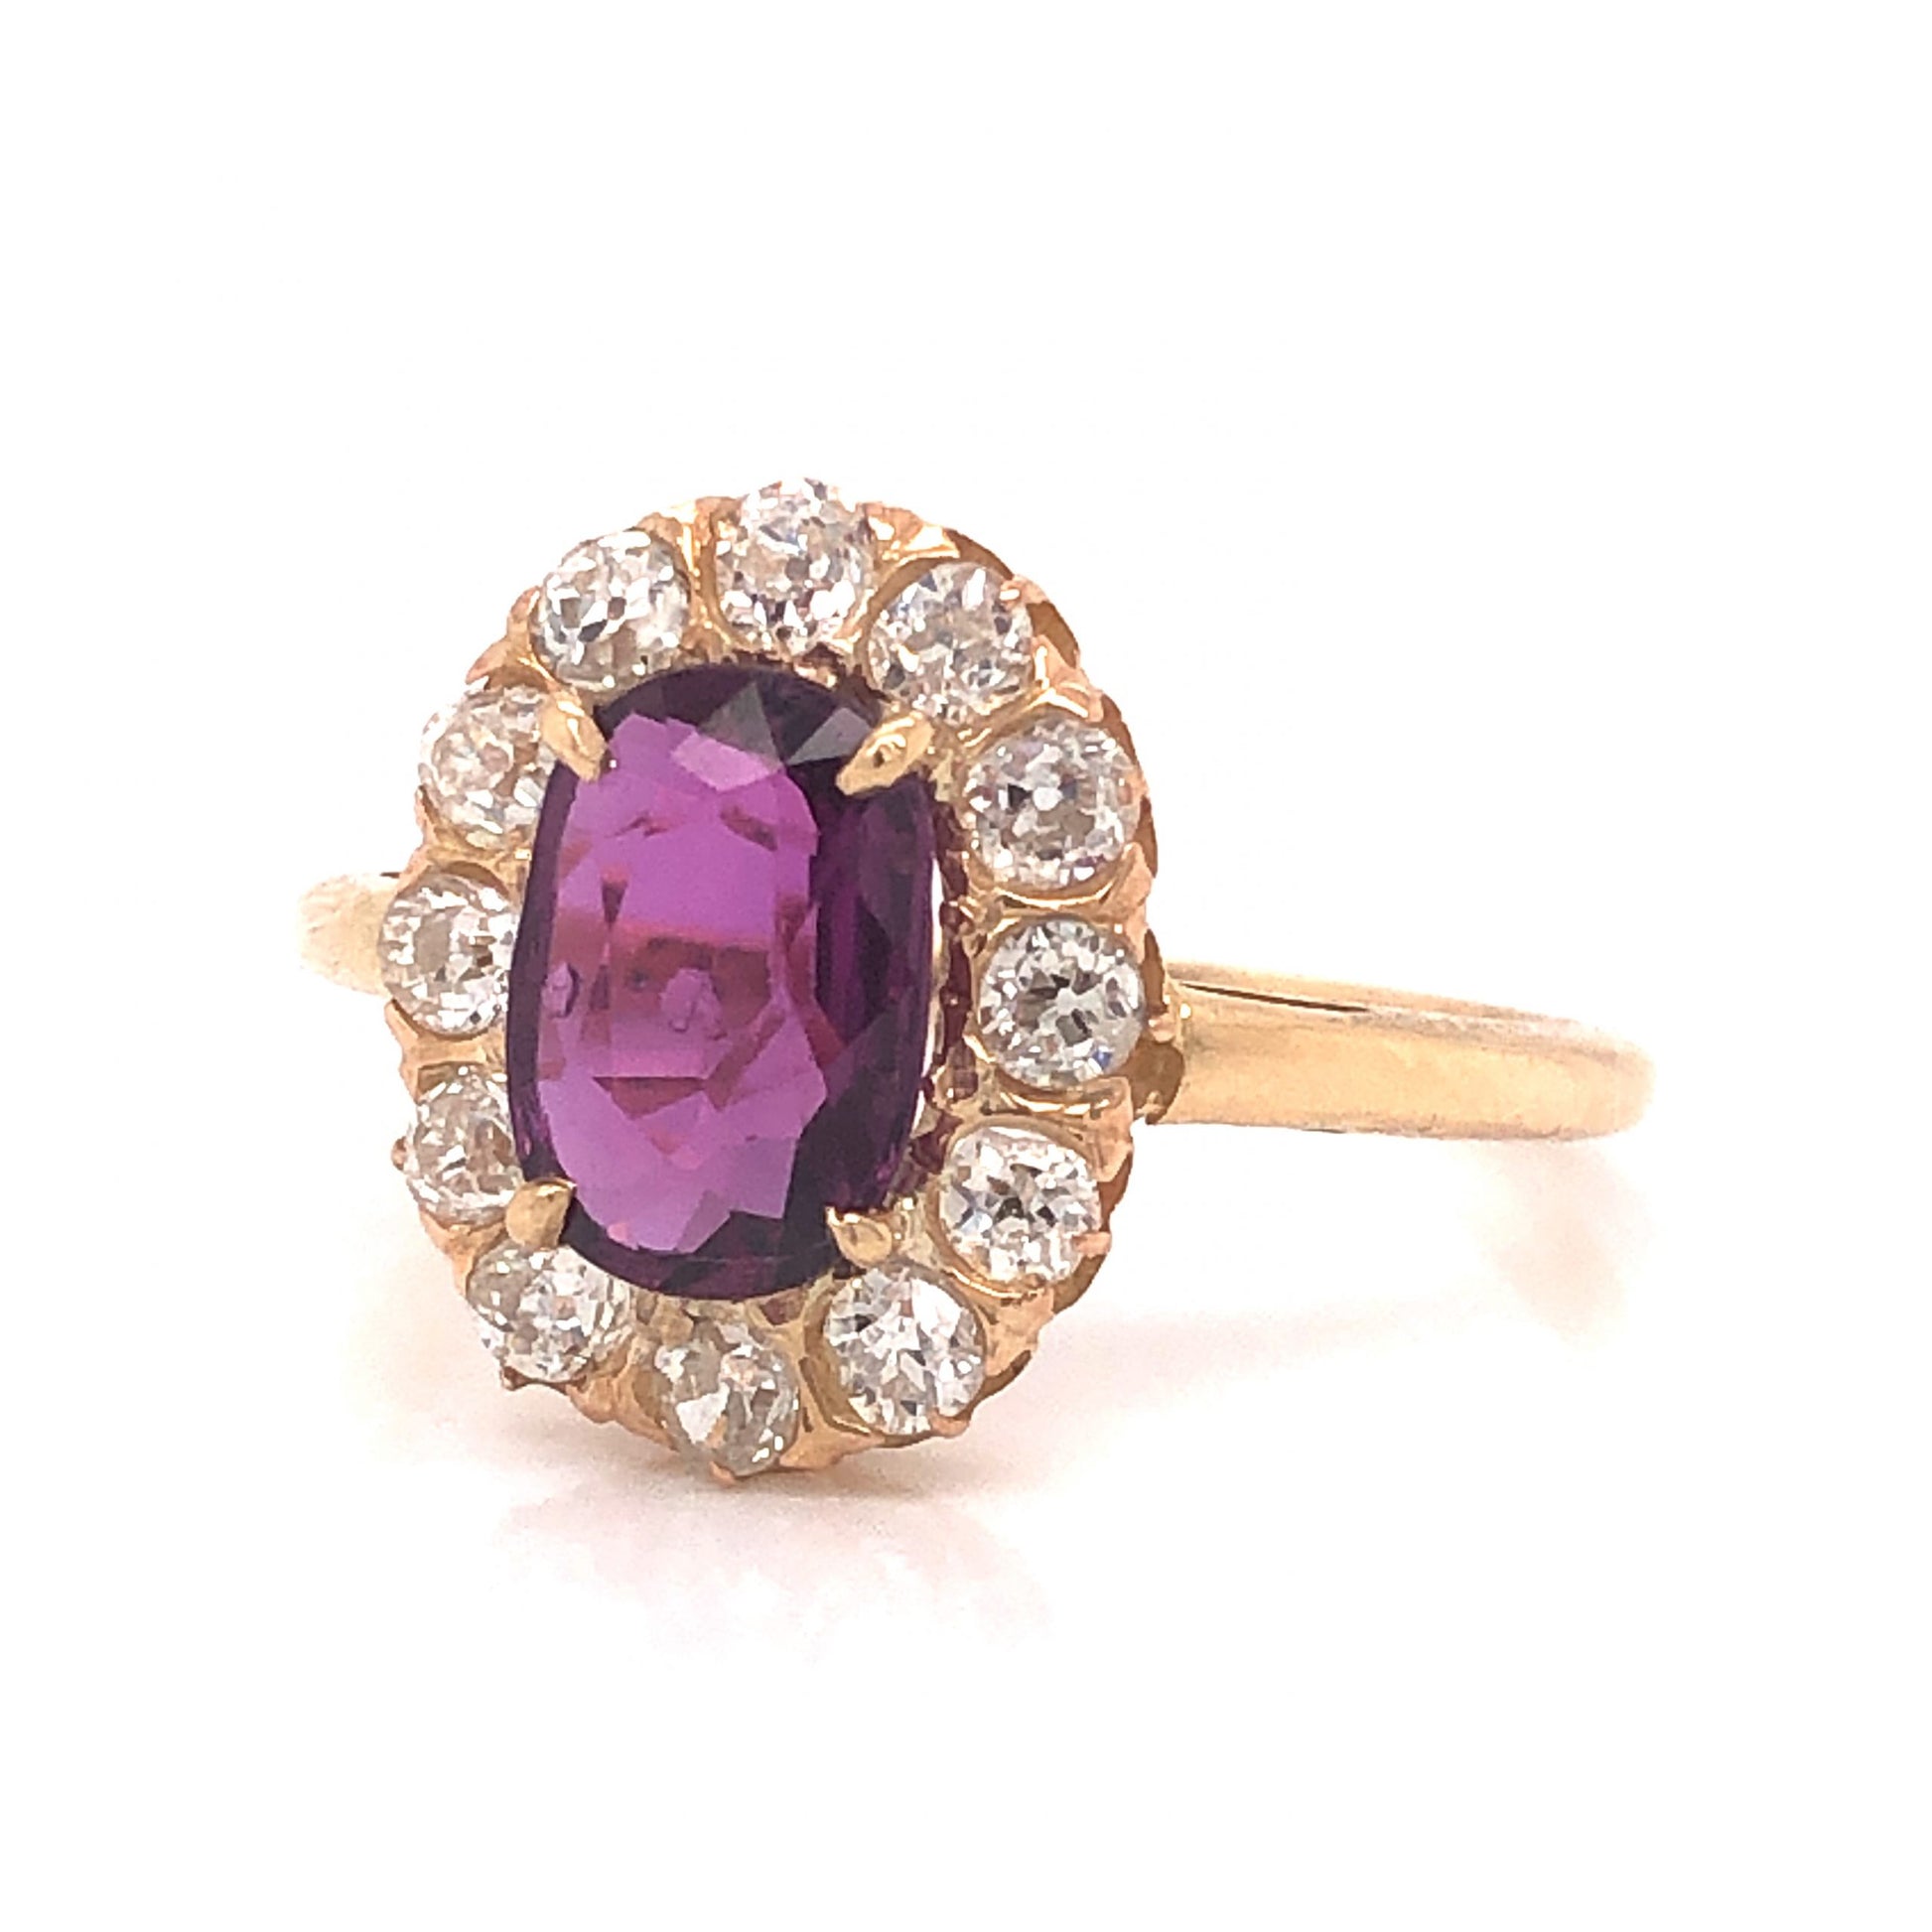 Victorian Ruby & Diamond Engagement Ring in 14k Yellow Gold